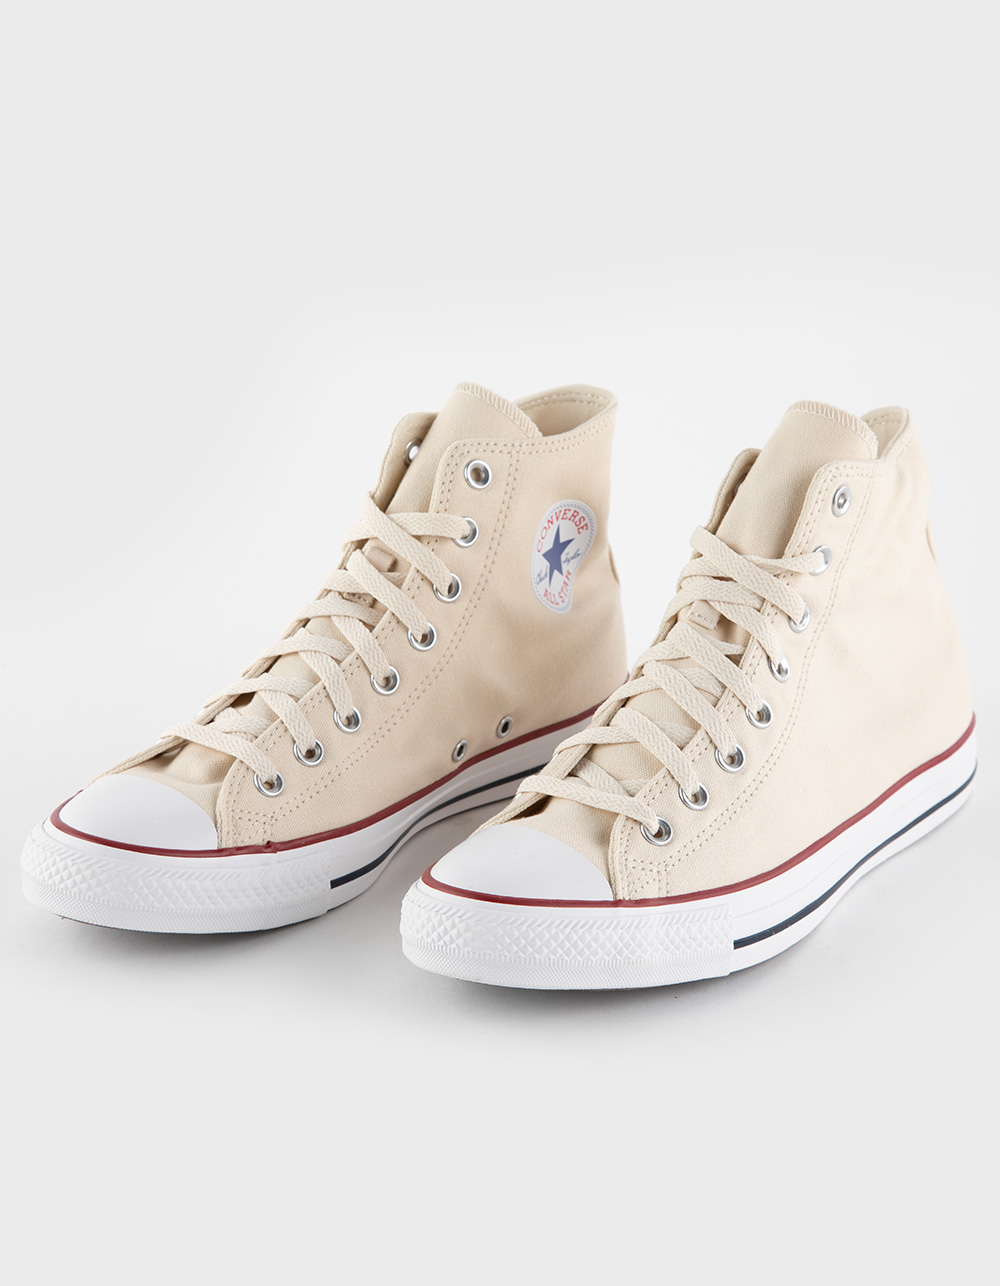 CONVERSE Chuck Taylor All Star High Top Shoes